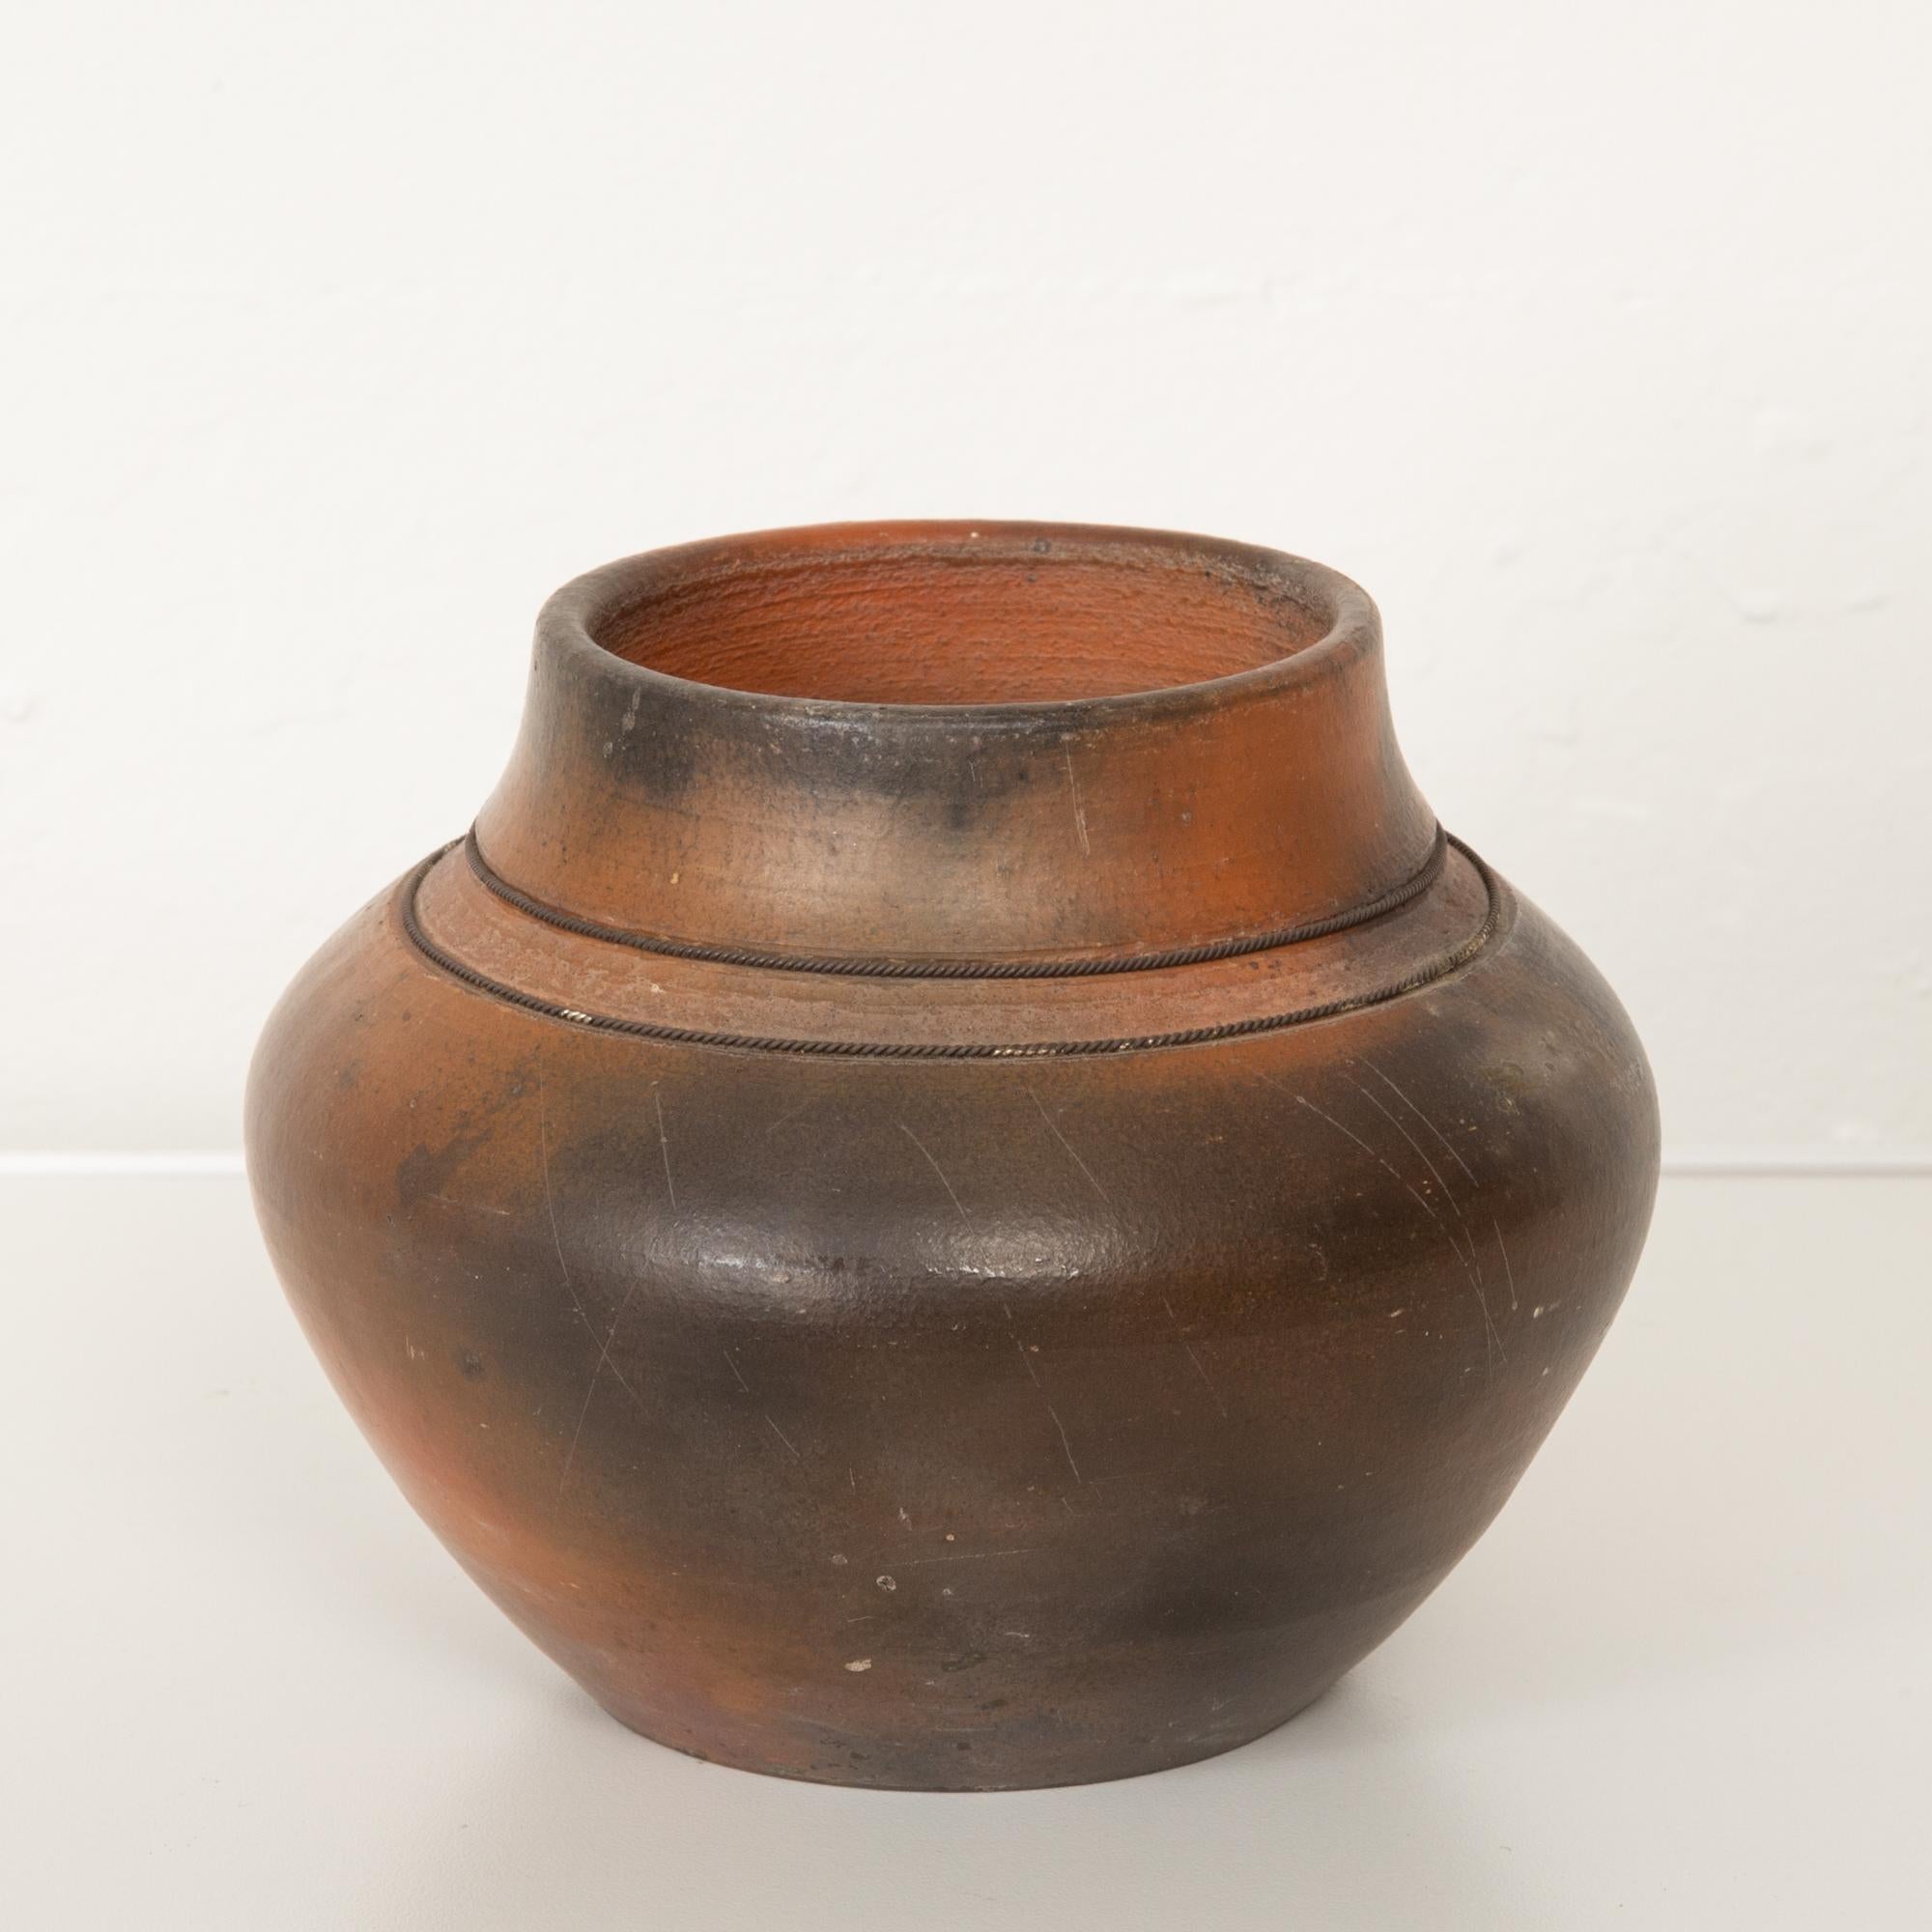 Studio ceramic vessel with Raku glaze. This wheel thrown vase features a bright orange-toned matte Raku glaze with black accents. Detailed with two textured striated lines around the neck. 
Signed on the underside with the maker's mark. Dated